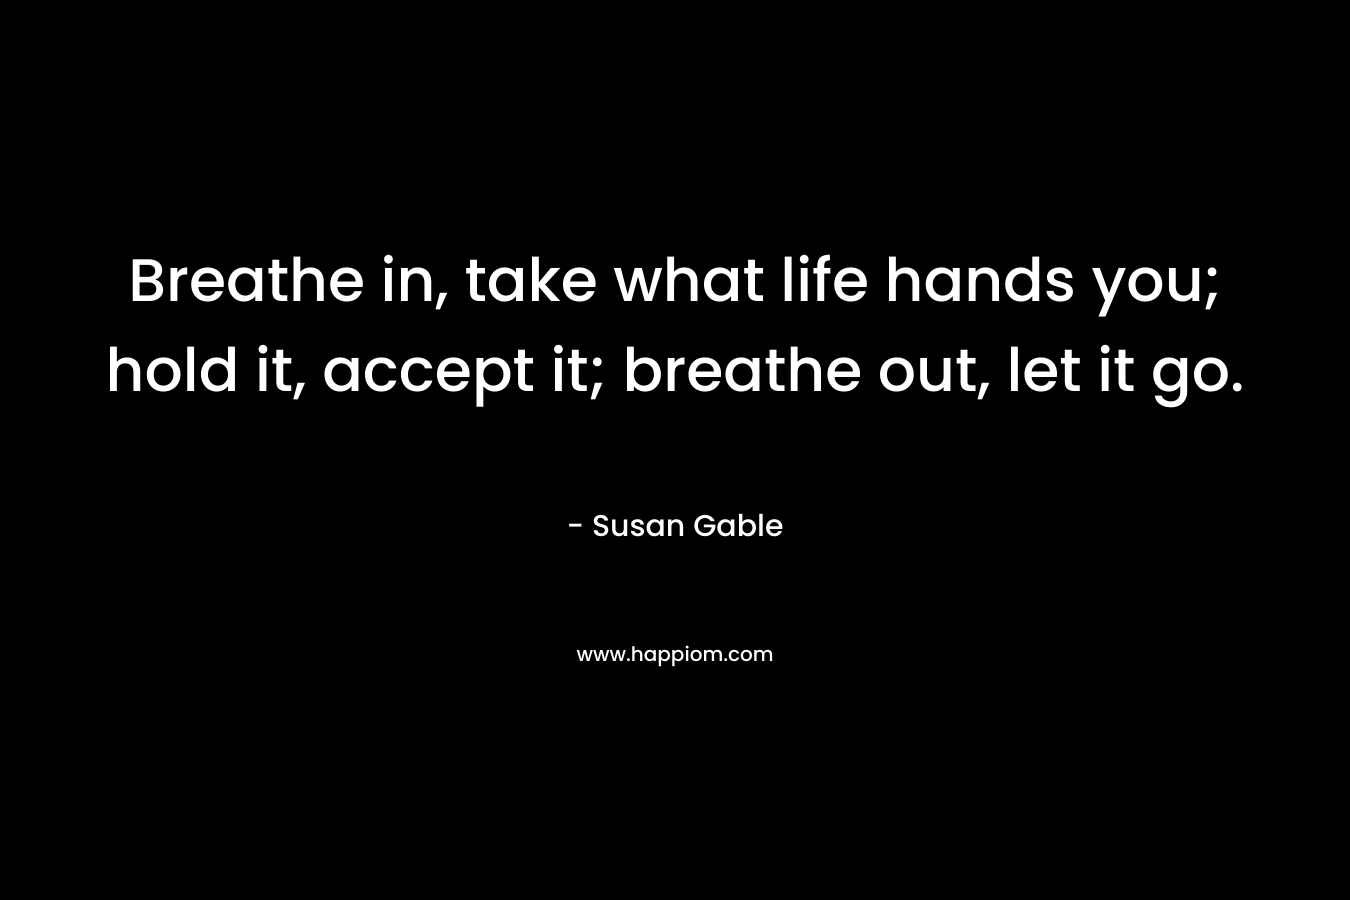 Breathe in, take what life hands you; hold it, accept it; breathe out, let it go.